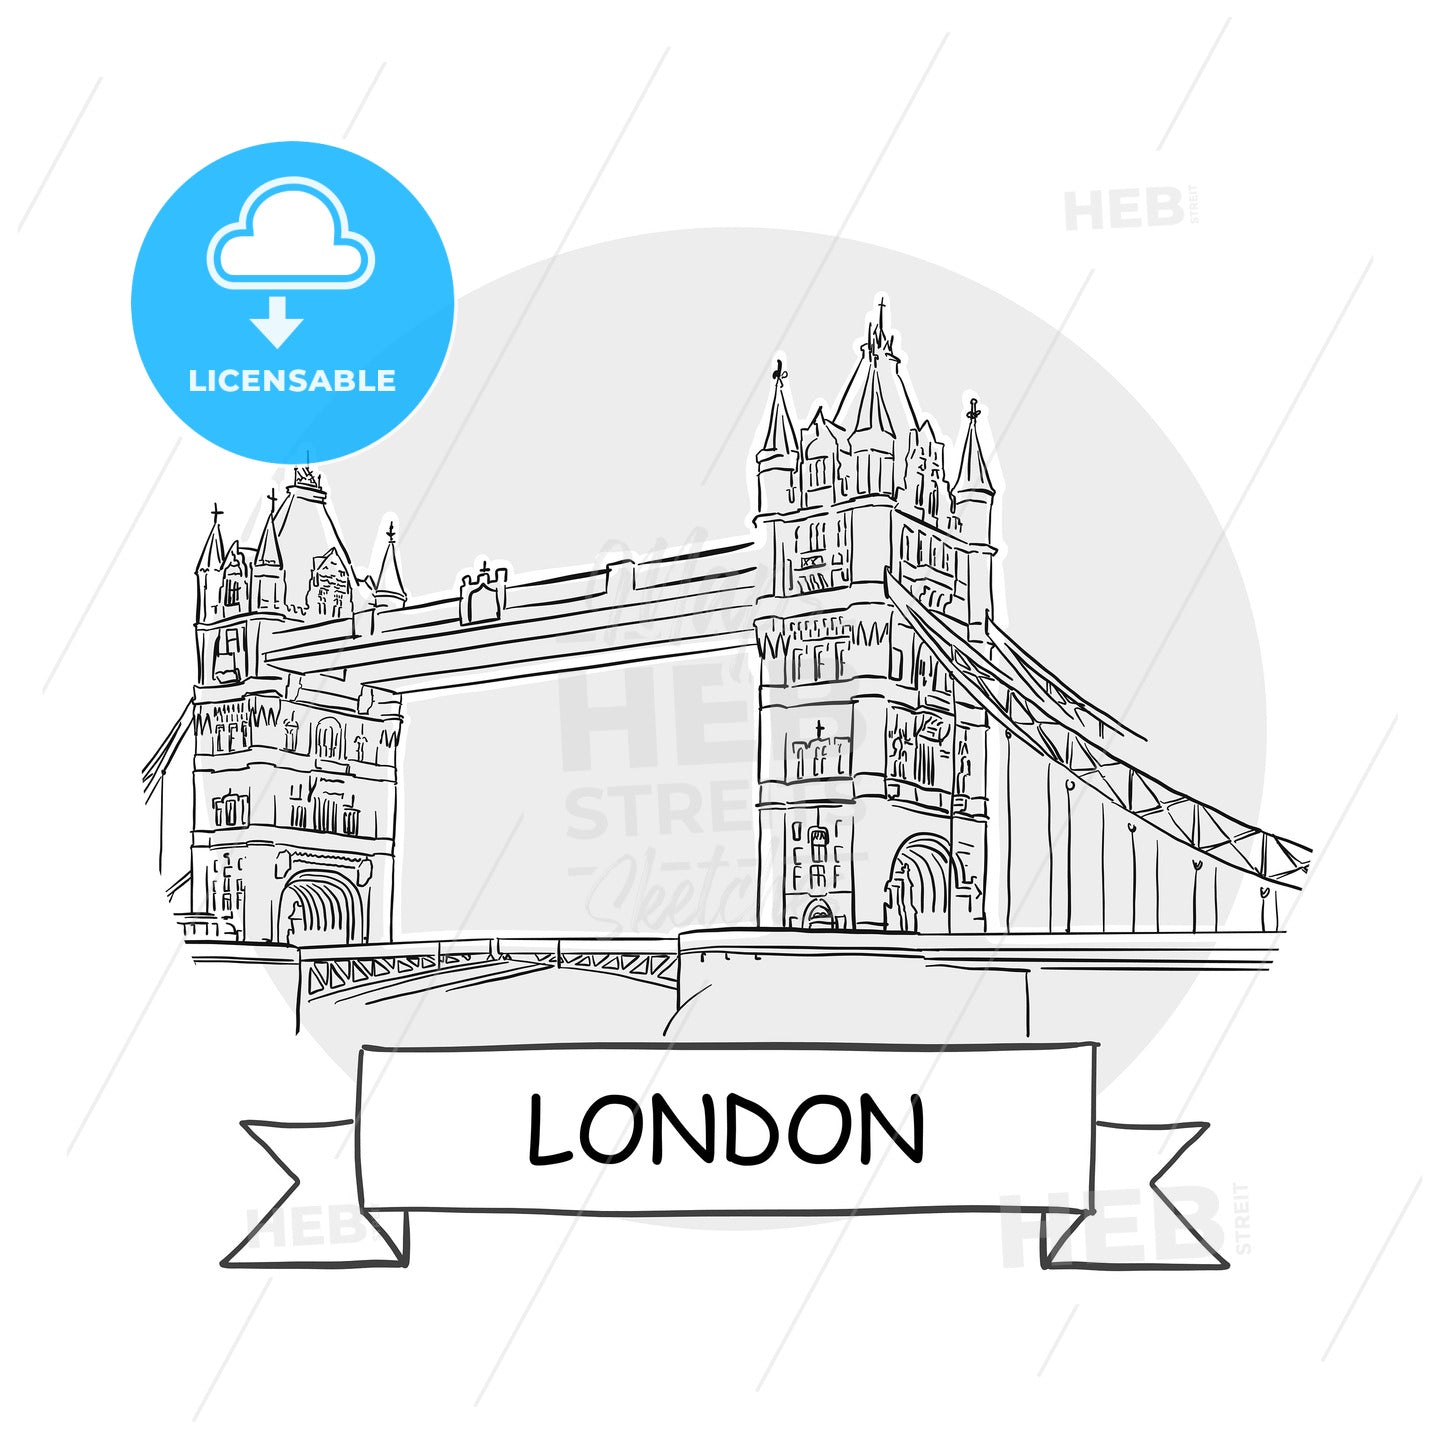 London hand-drawn urban vector sign – instant download